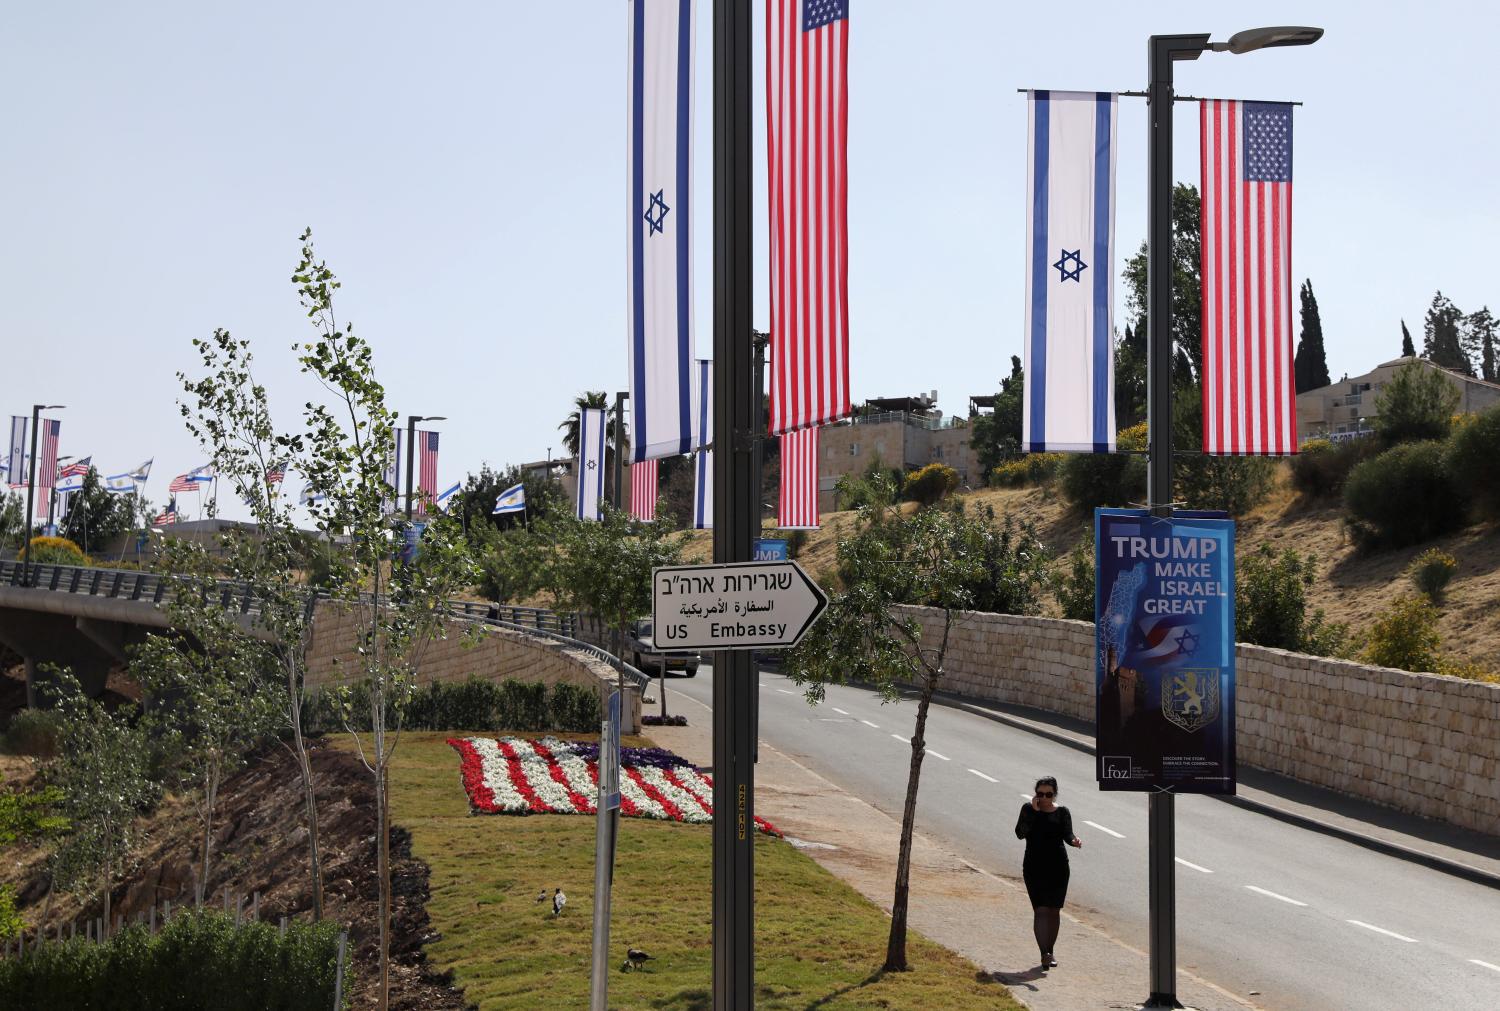 A woman walks next to a road sign directing to the U.S. embassy, in the area of the U.S. consulate in Jerusalem, May 11, 2018. REUTERS/Ammar Awad - RC190ACBAC00